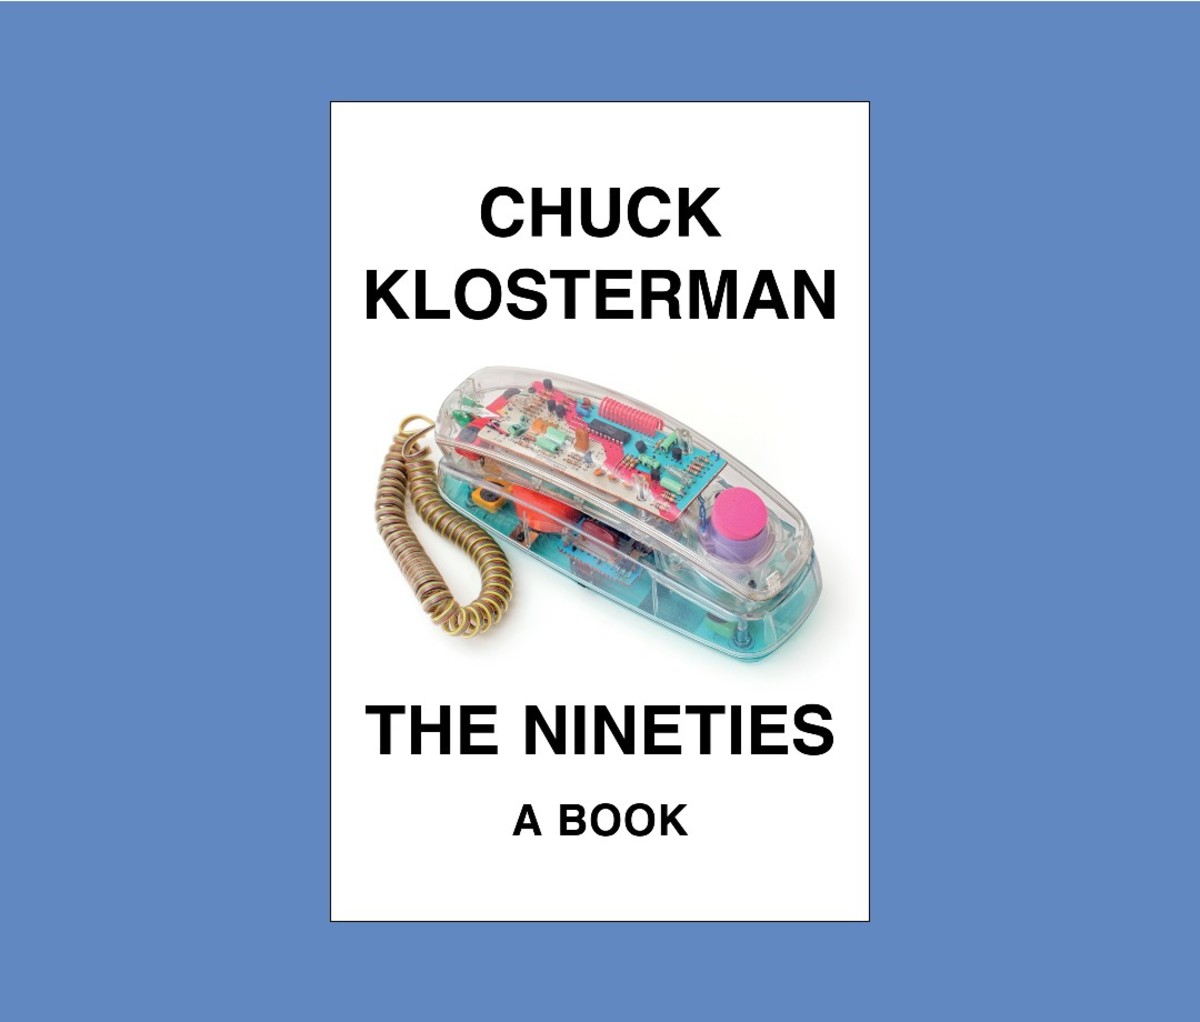 The 90s: A Book by Chuck Klosterman